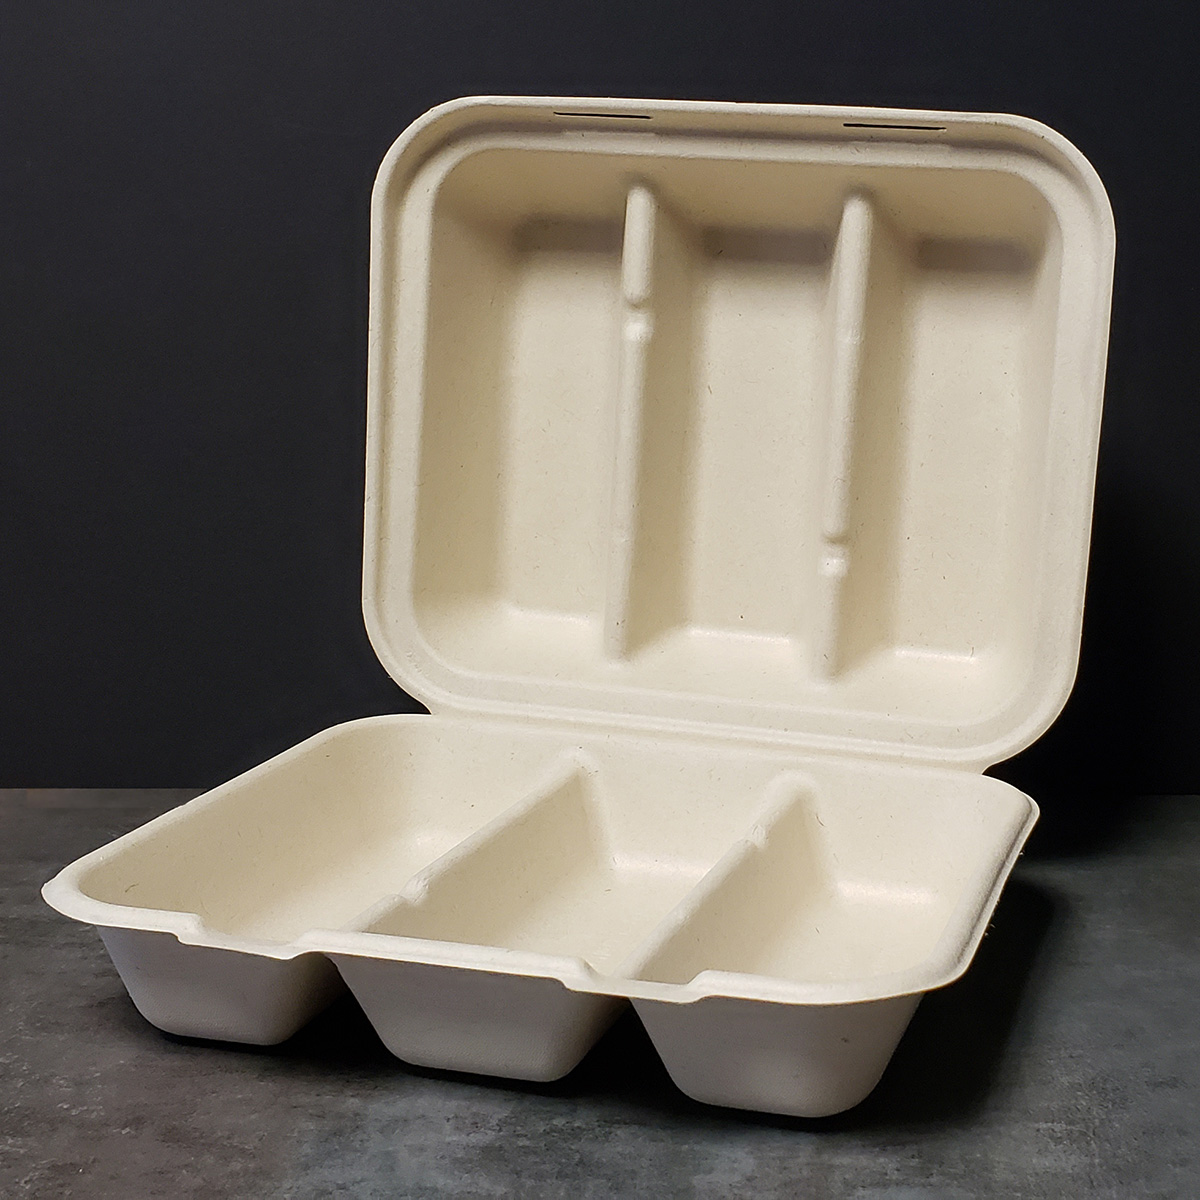 Styrofoam Clamshell Takeout Container for Single Meal